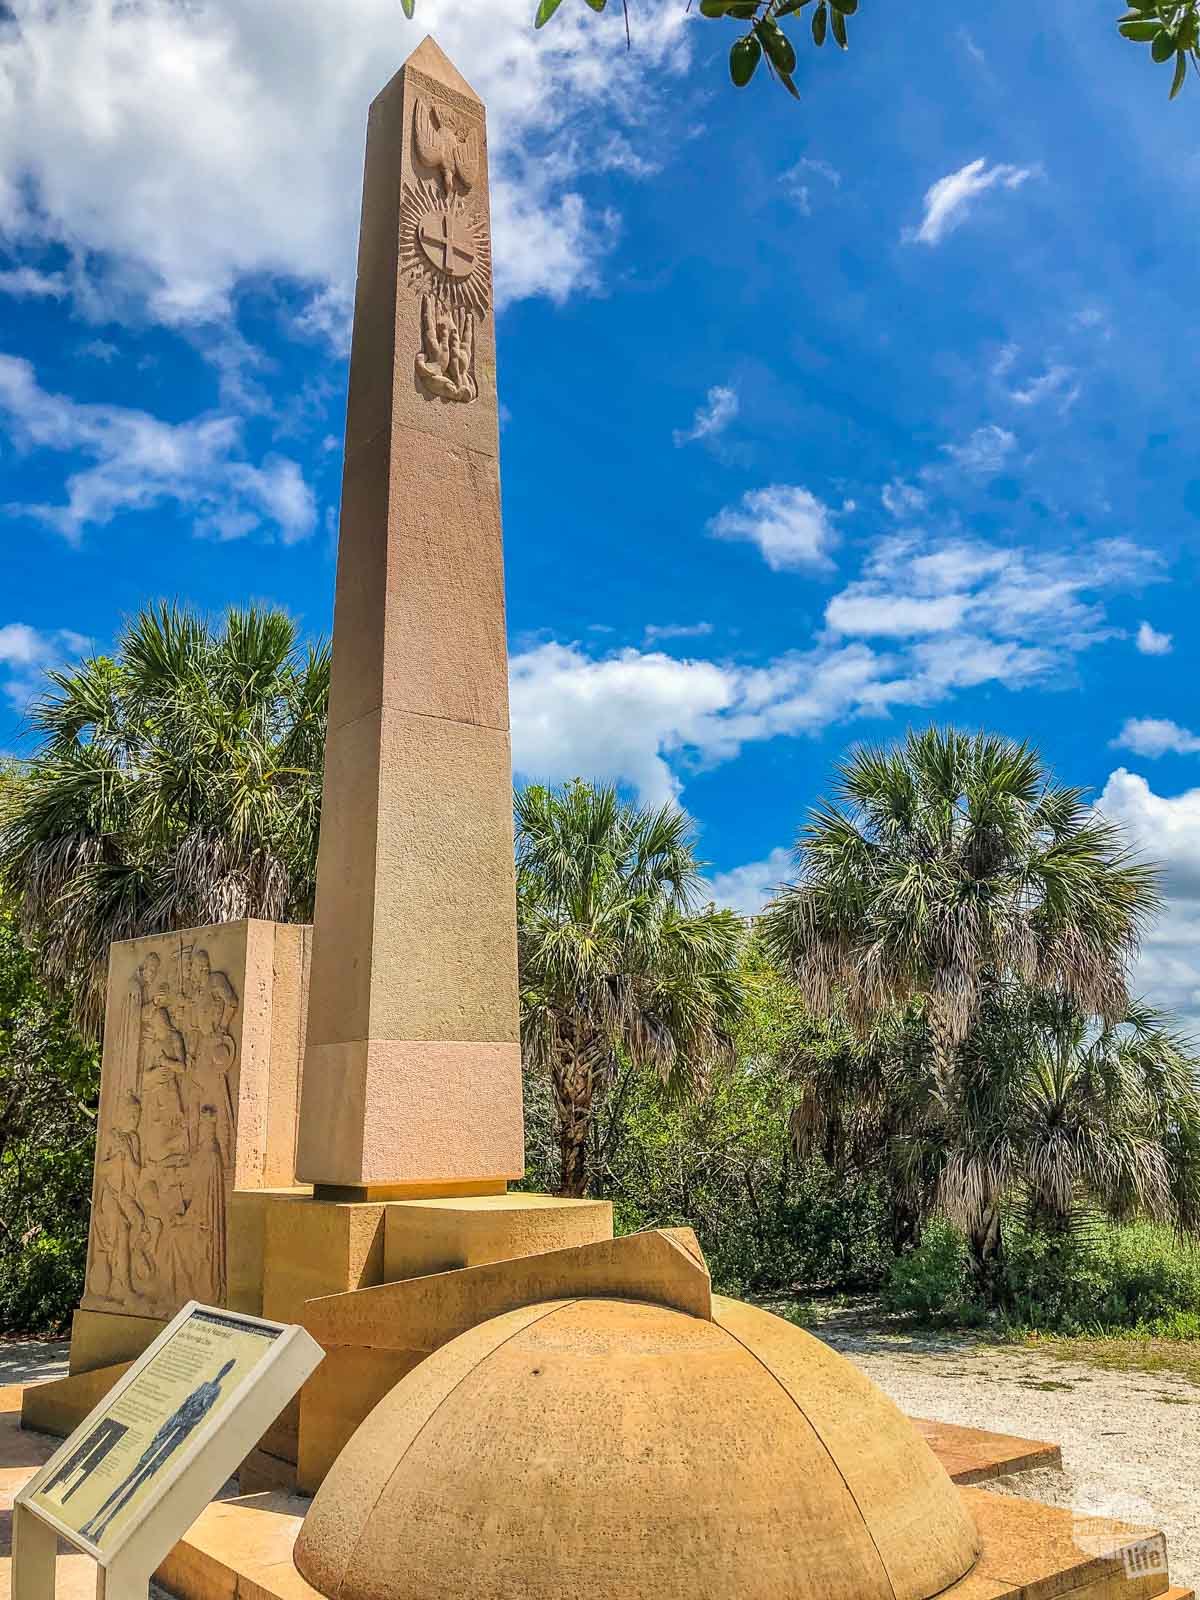 A picture of a monument in Desoto National Memorial showing what I could capture normally using an iPhone camera.